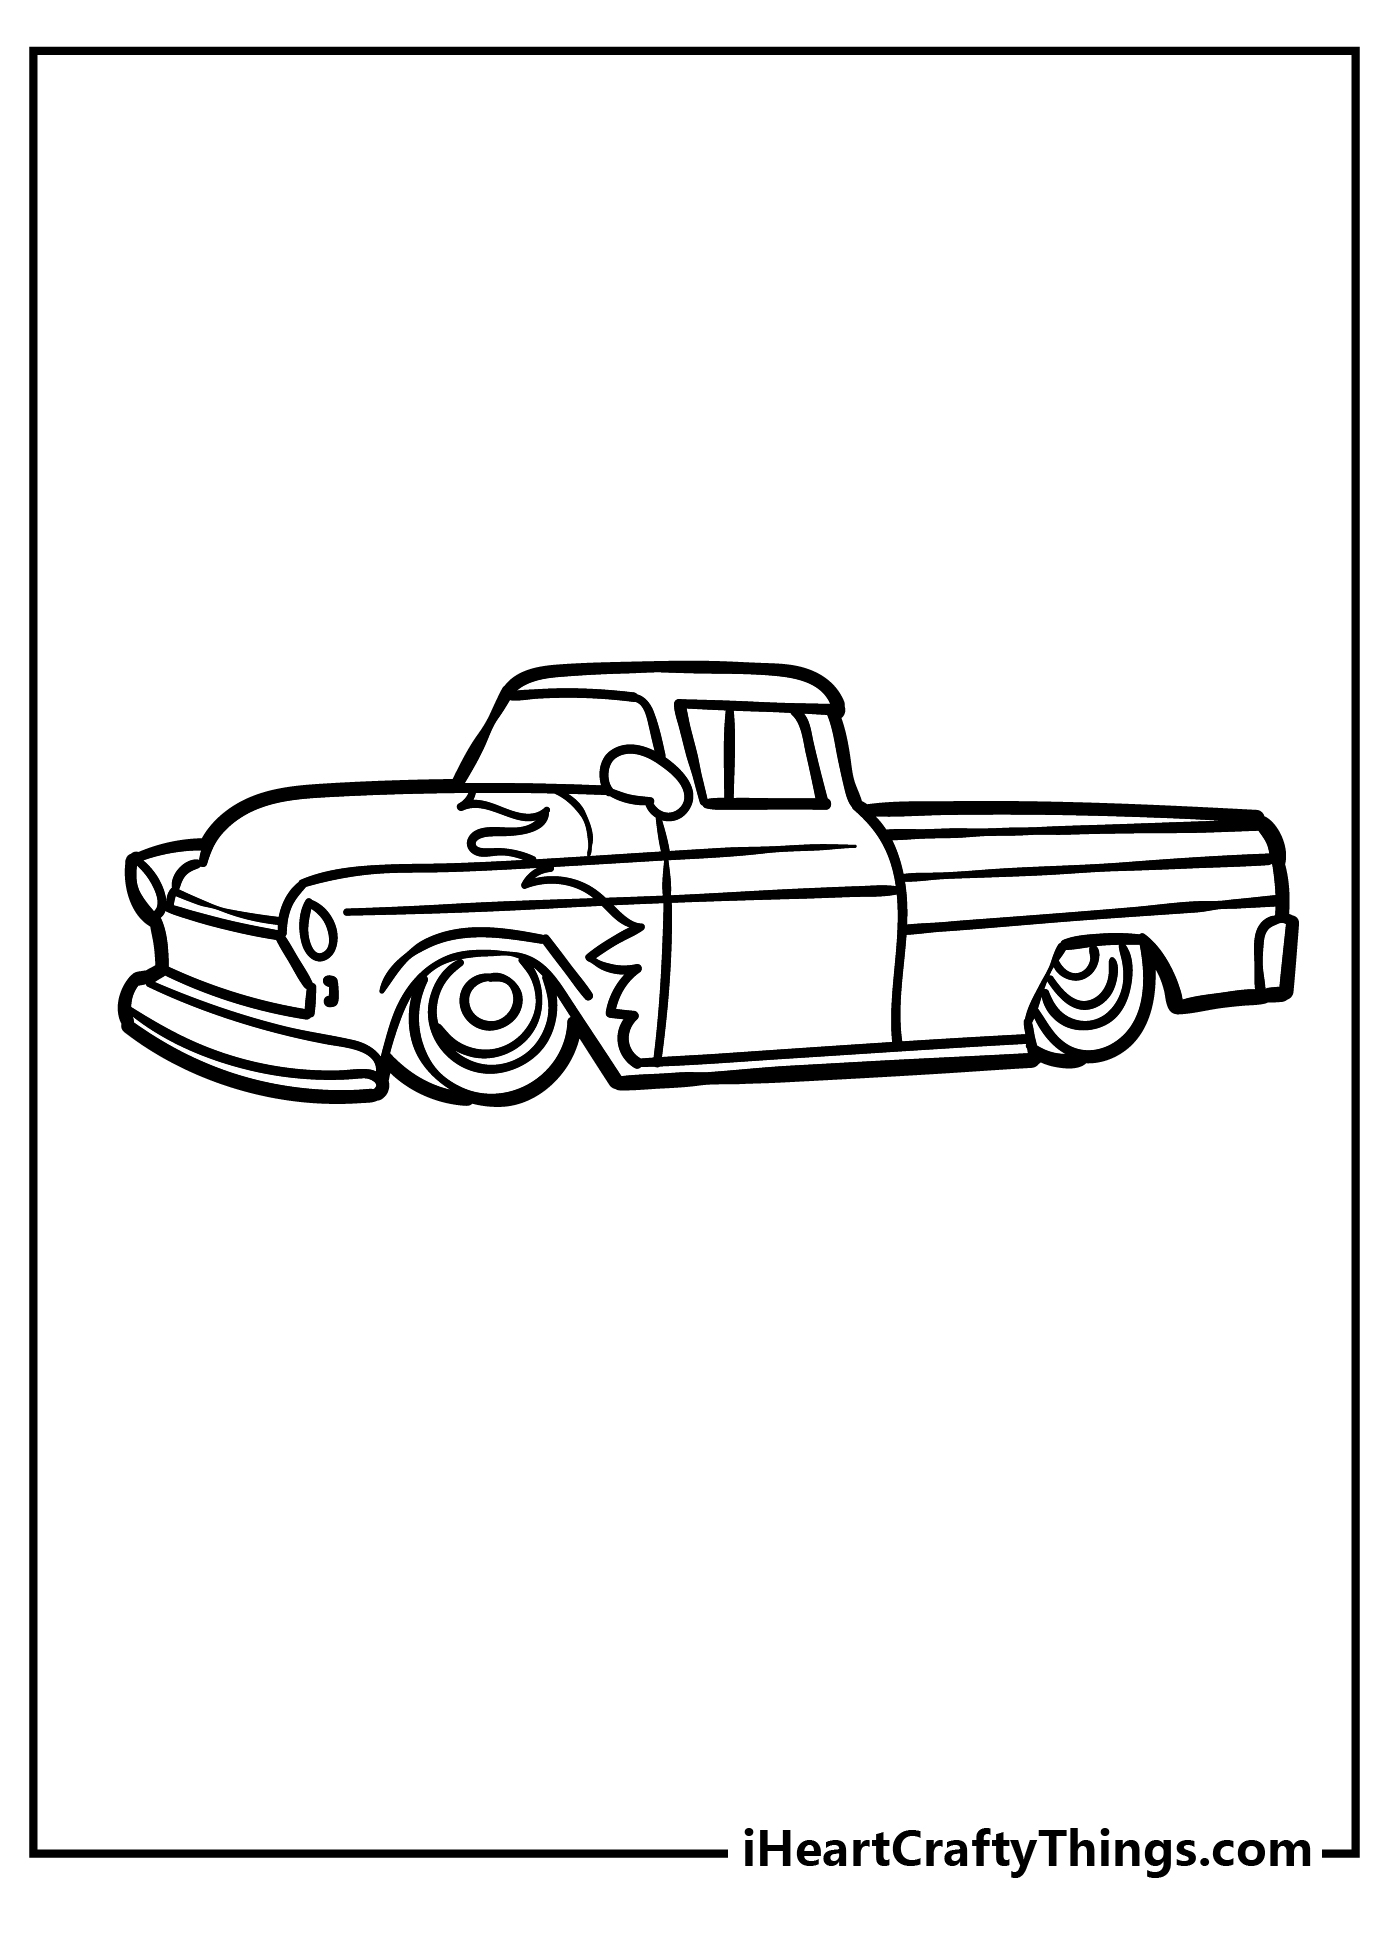 Hot rod coloring pages free printables